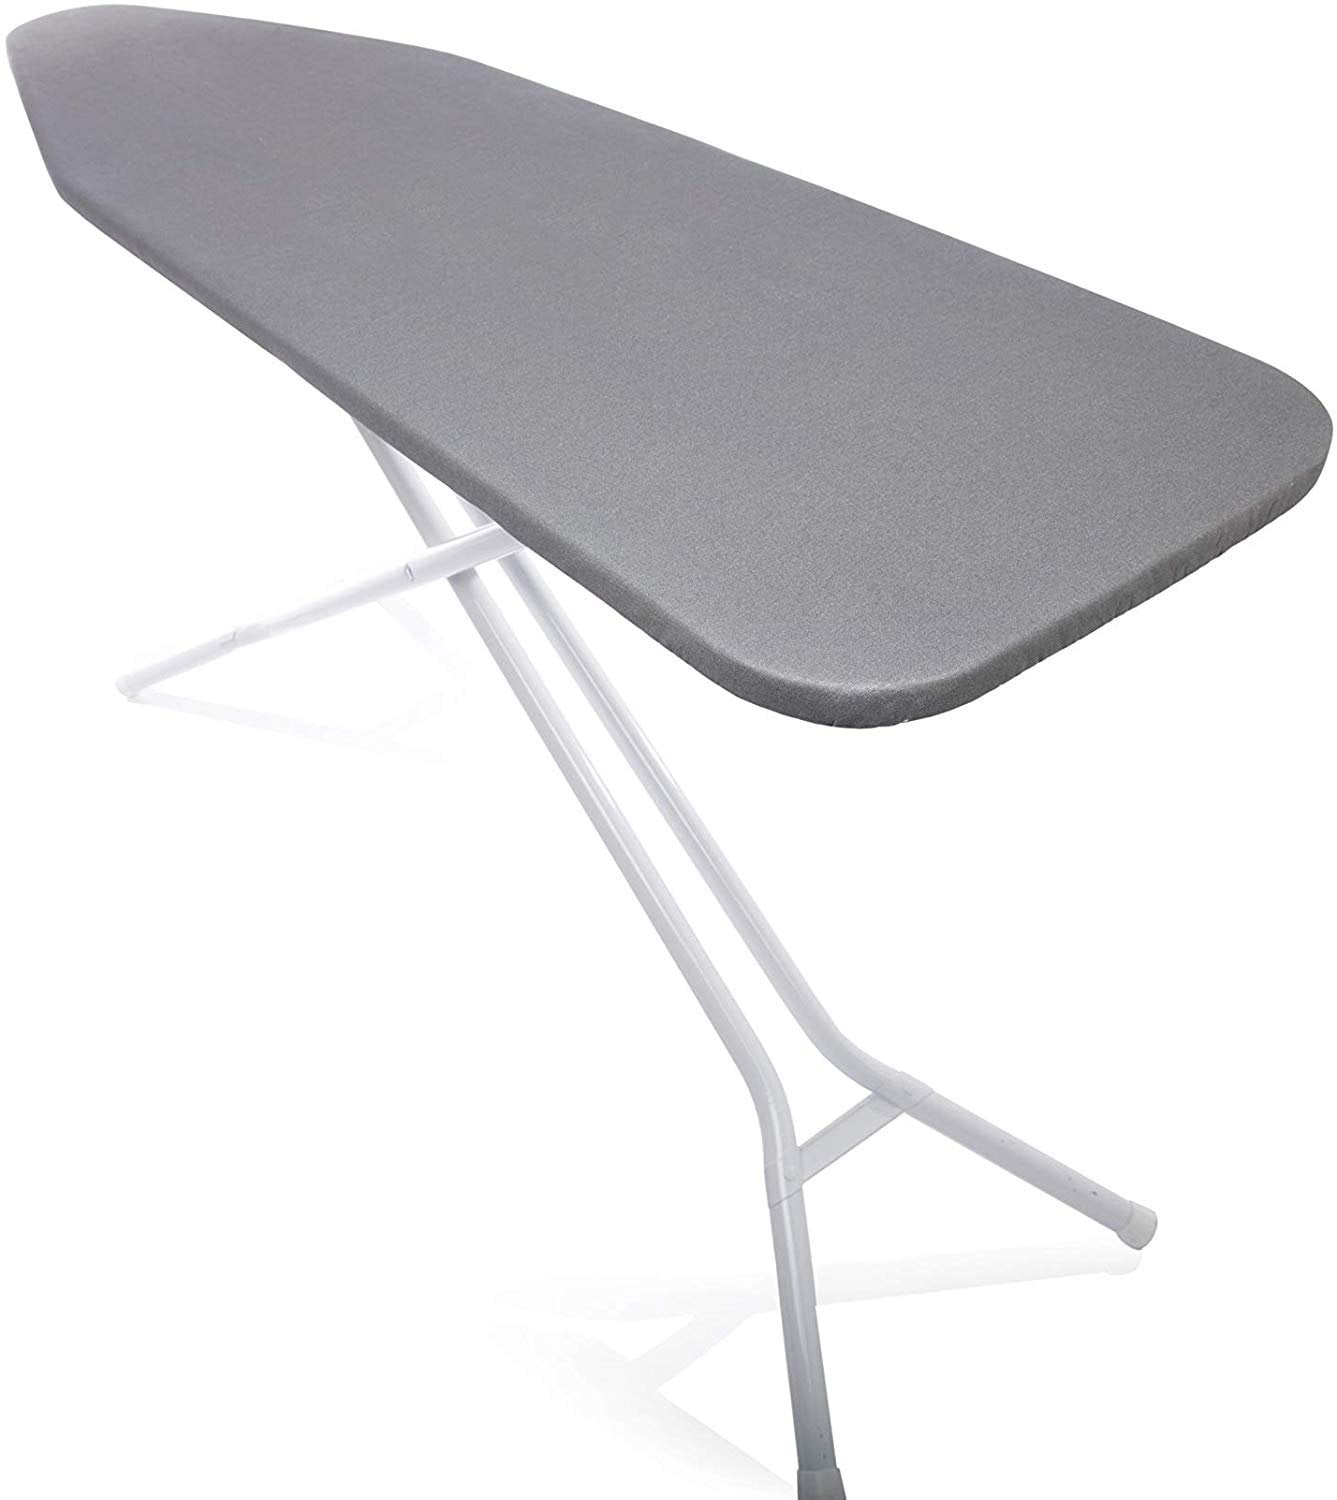 scorch resistant coating 21" x 57" ironing board cover Metallic heat-reflective 